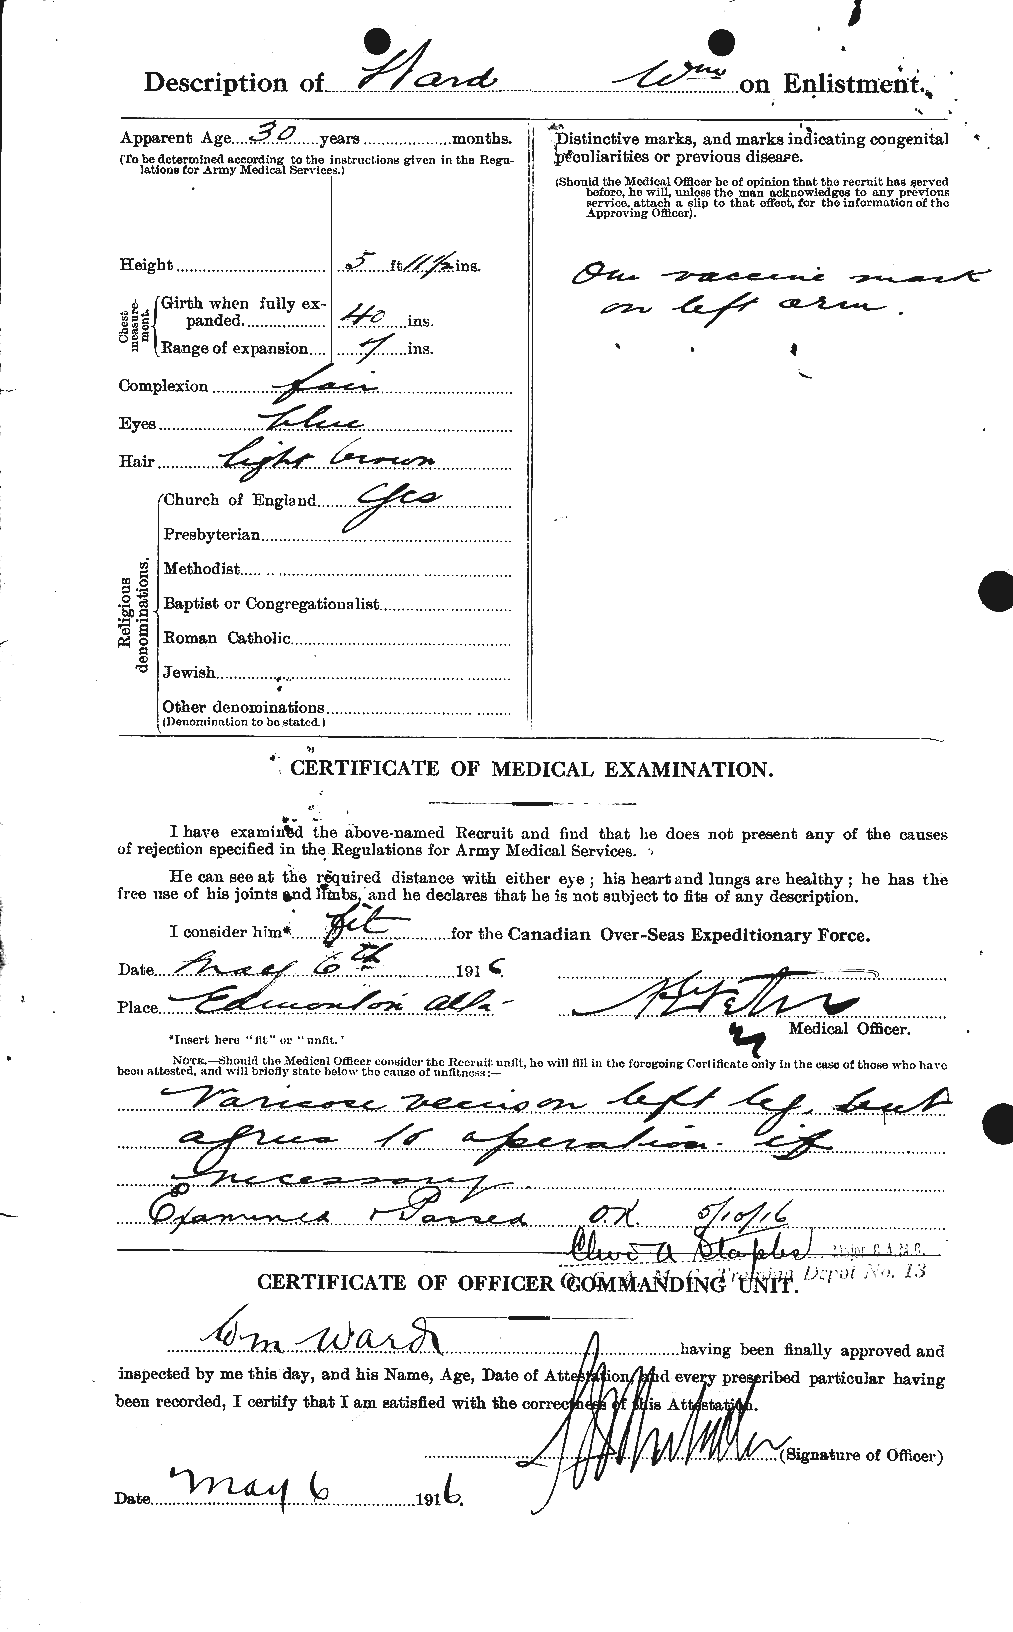 Personnel Records of the First World War - CEF 659793b